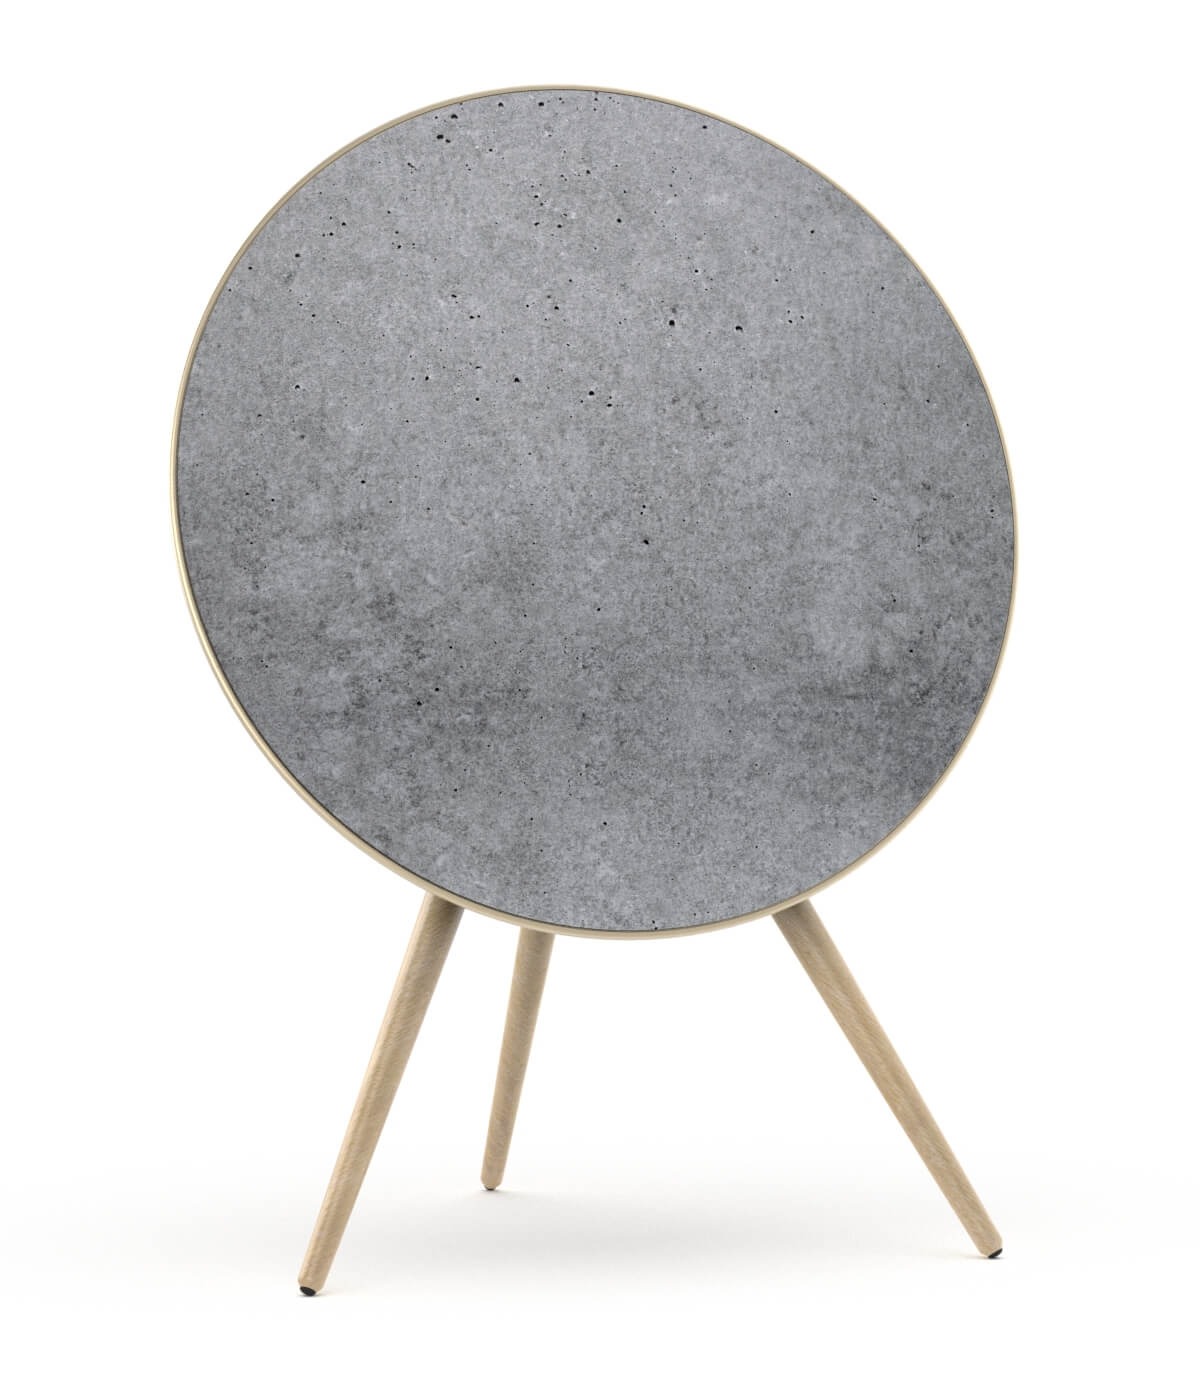 Skiniplay cover Concrete for Bang & Olufsen Beoplay A9 and Beosound A9 speaker